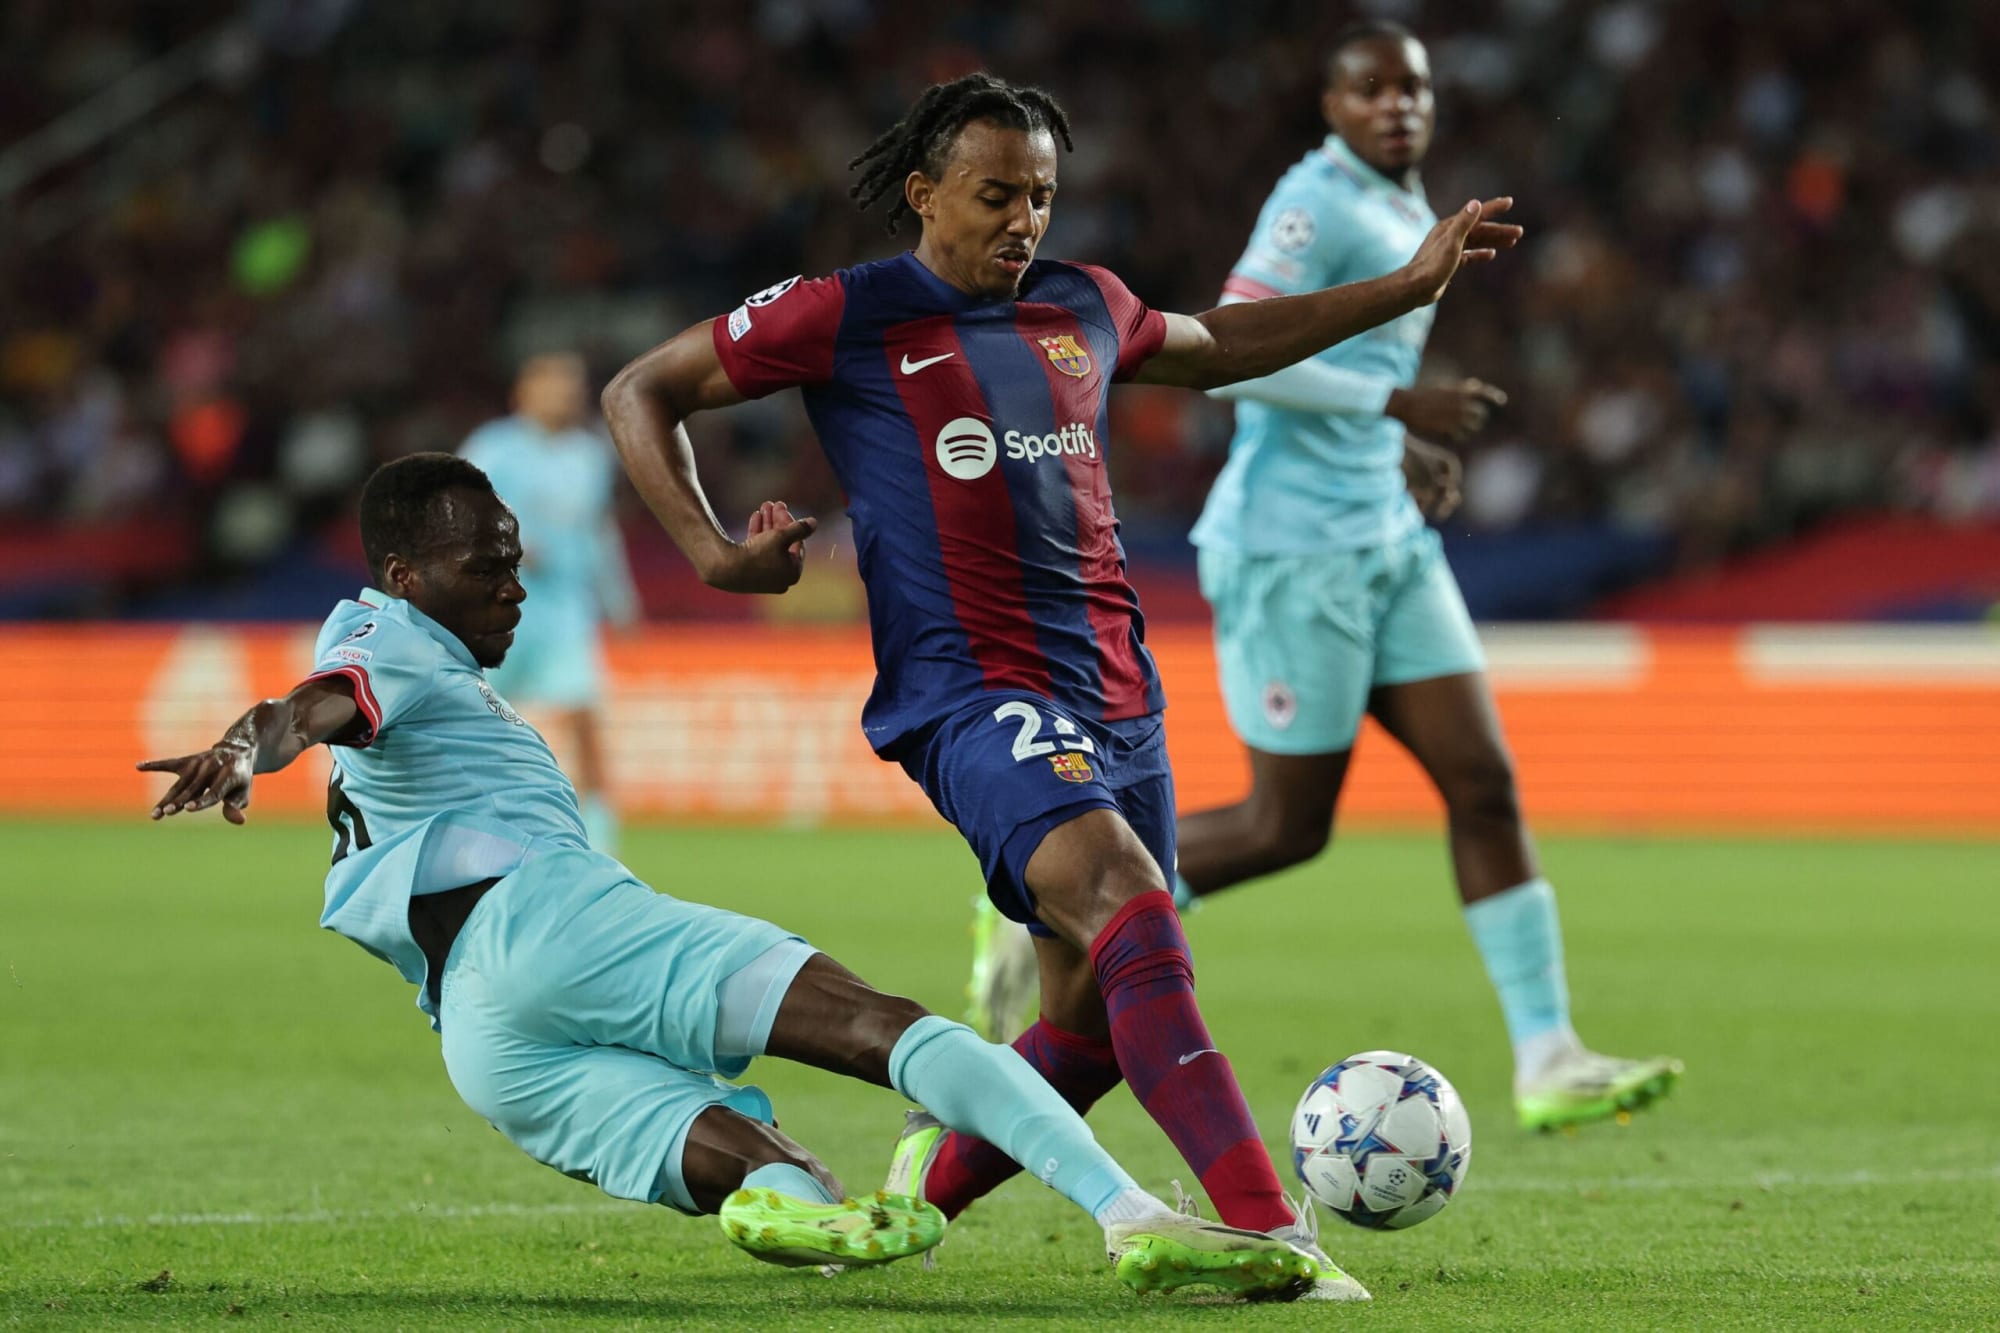 Barcelona downplay Champions League result